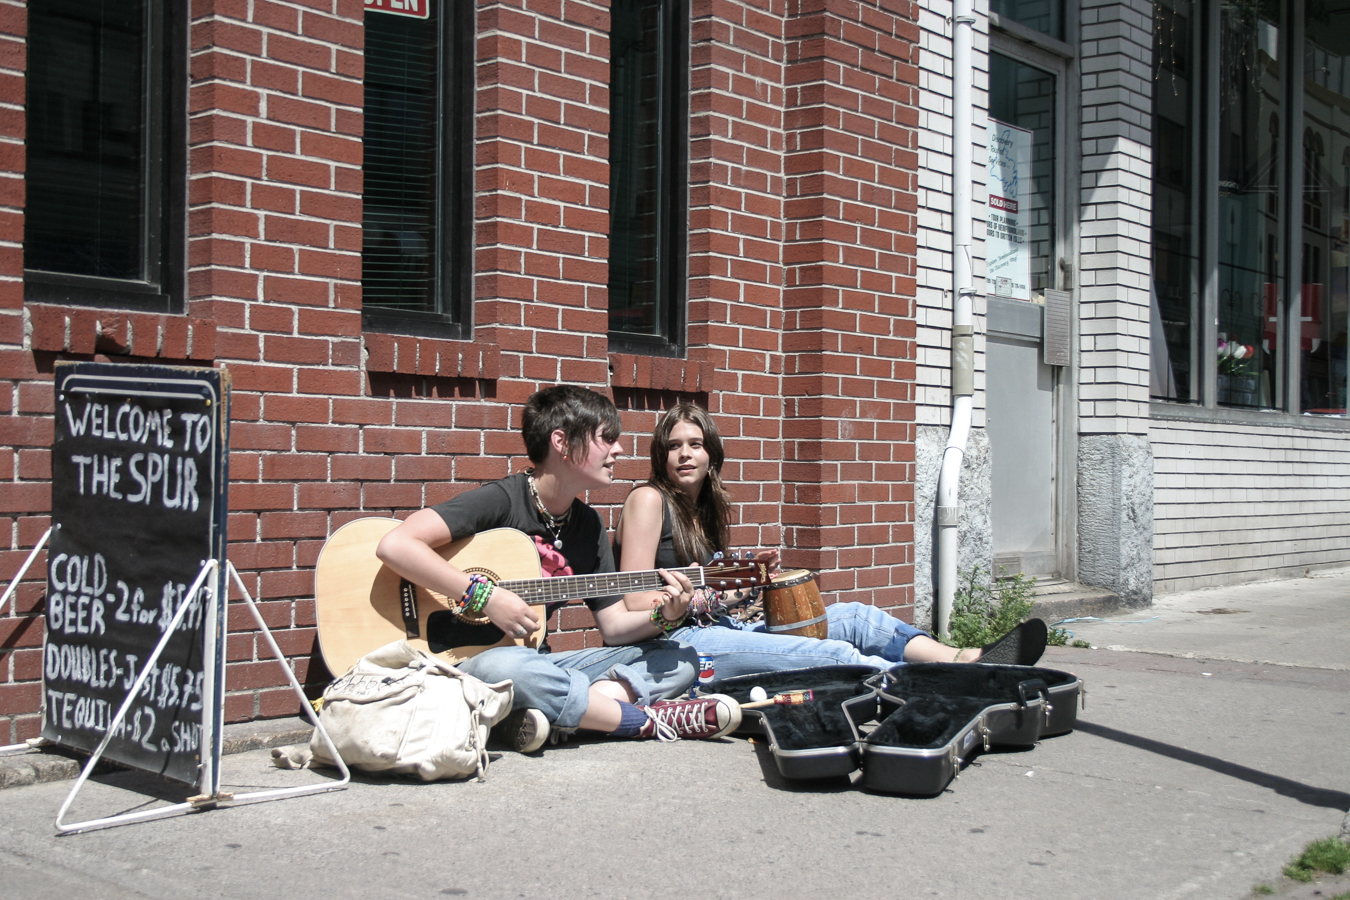 Two Ladies Busking in the AM Sun - The Spur, Water Street - 2004 